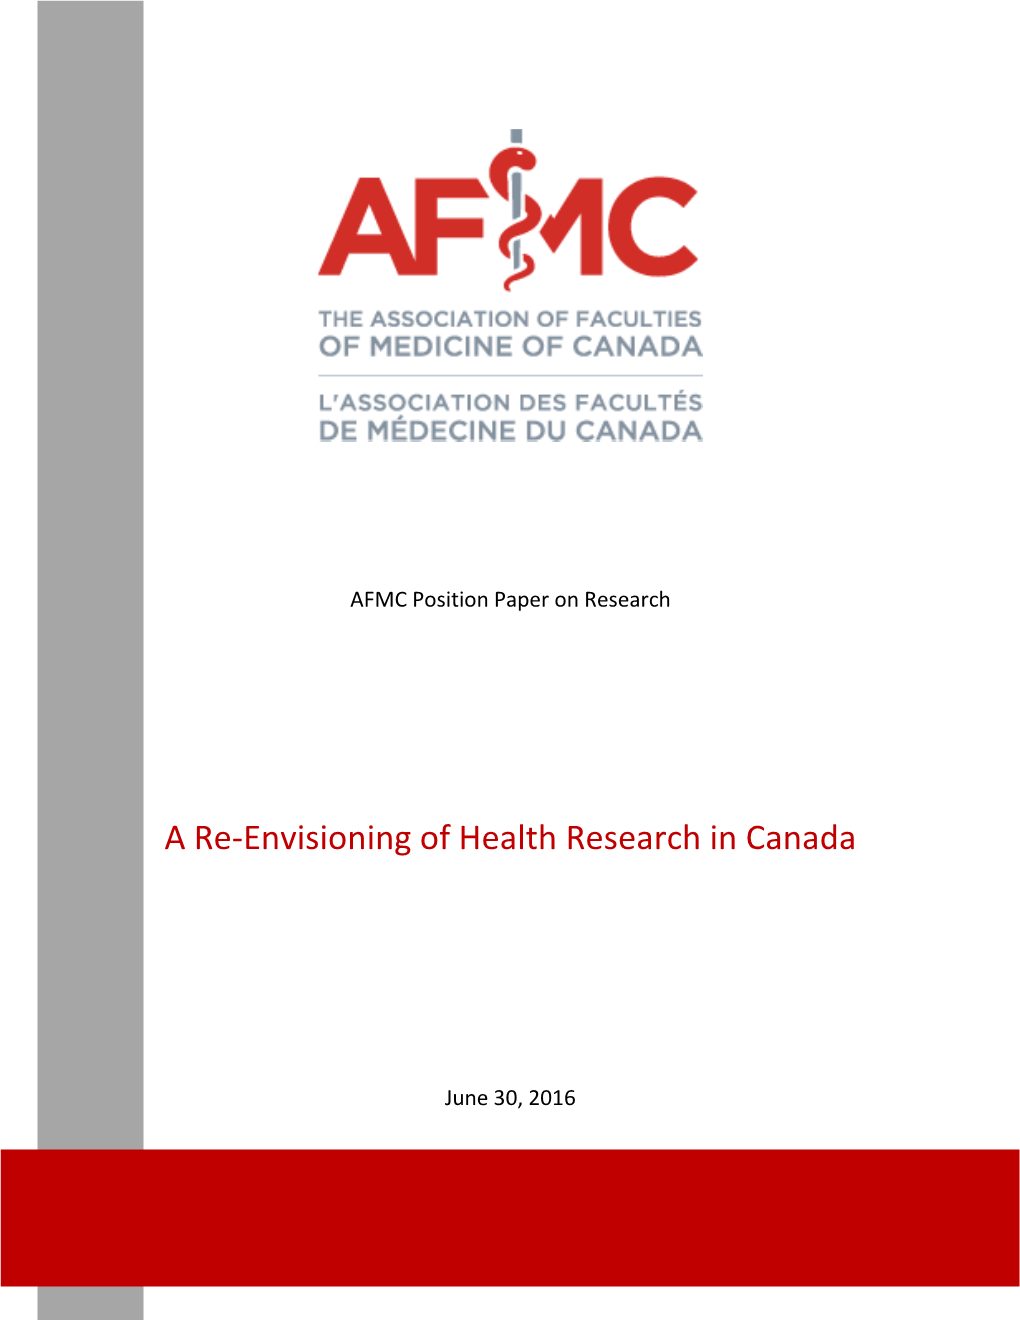 A Re-Envisioning of Health Research in Canada